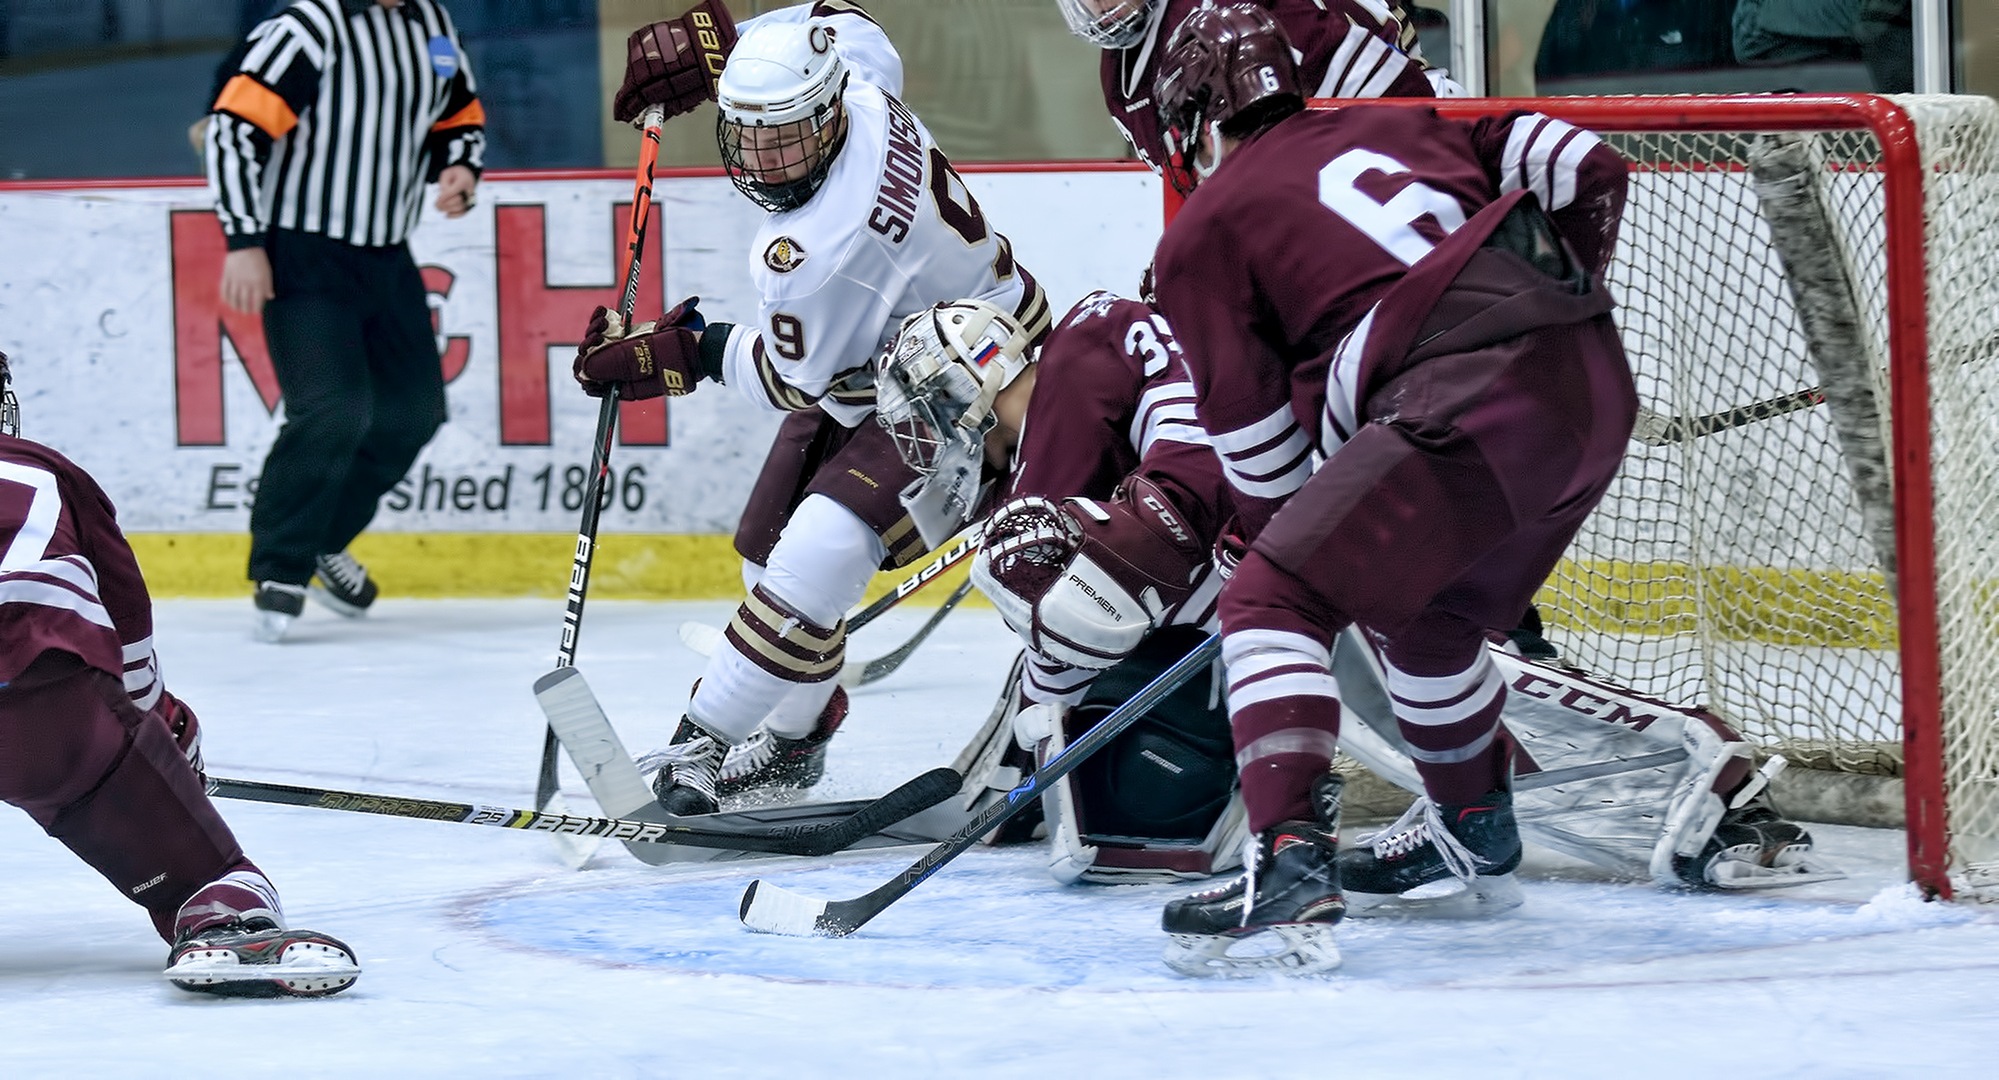 Parker Simonson looks to slide home a rebound in the second period of the Cobbers' semifinal win over Augsburg. He had two goals in CC's 3-2 win.